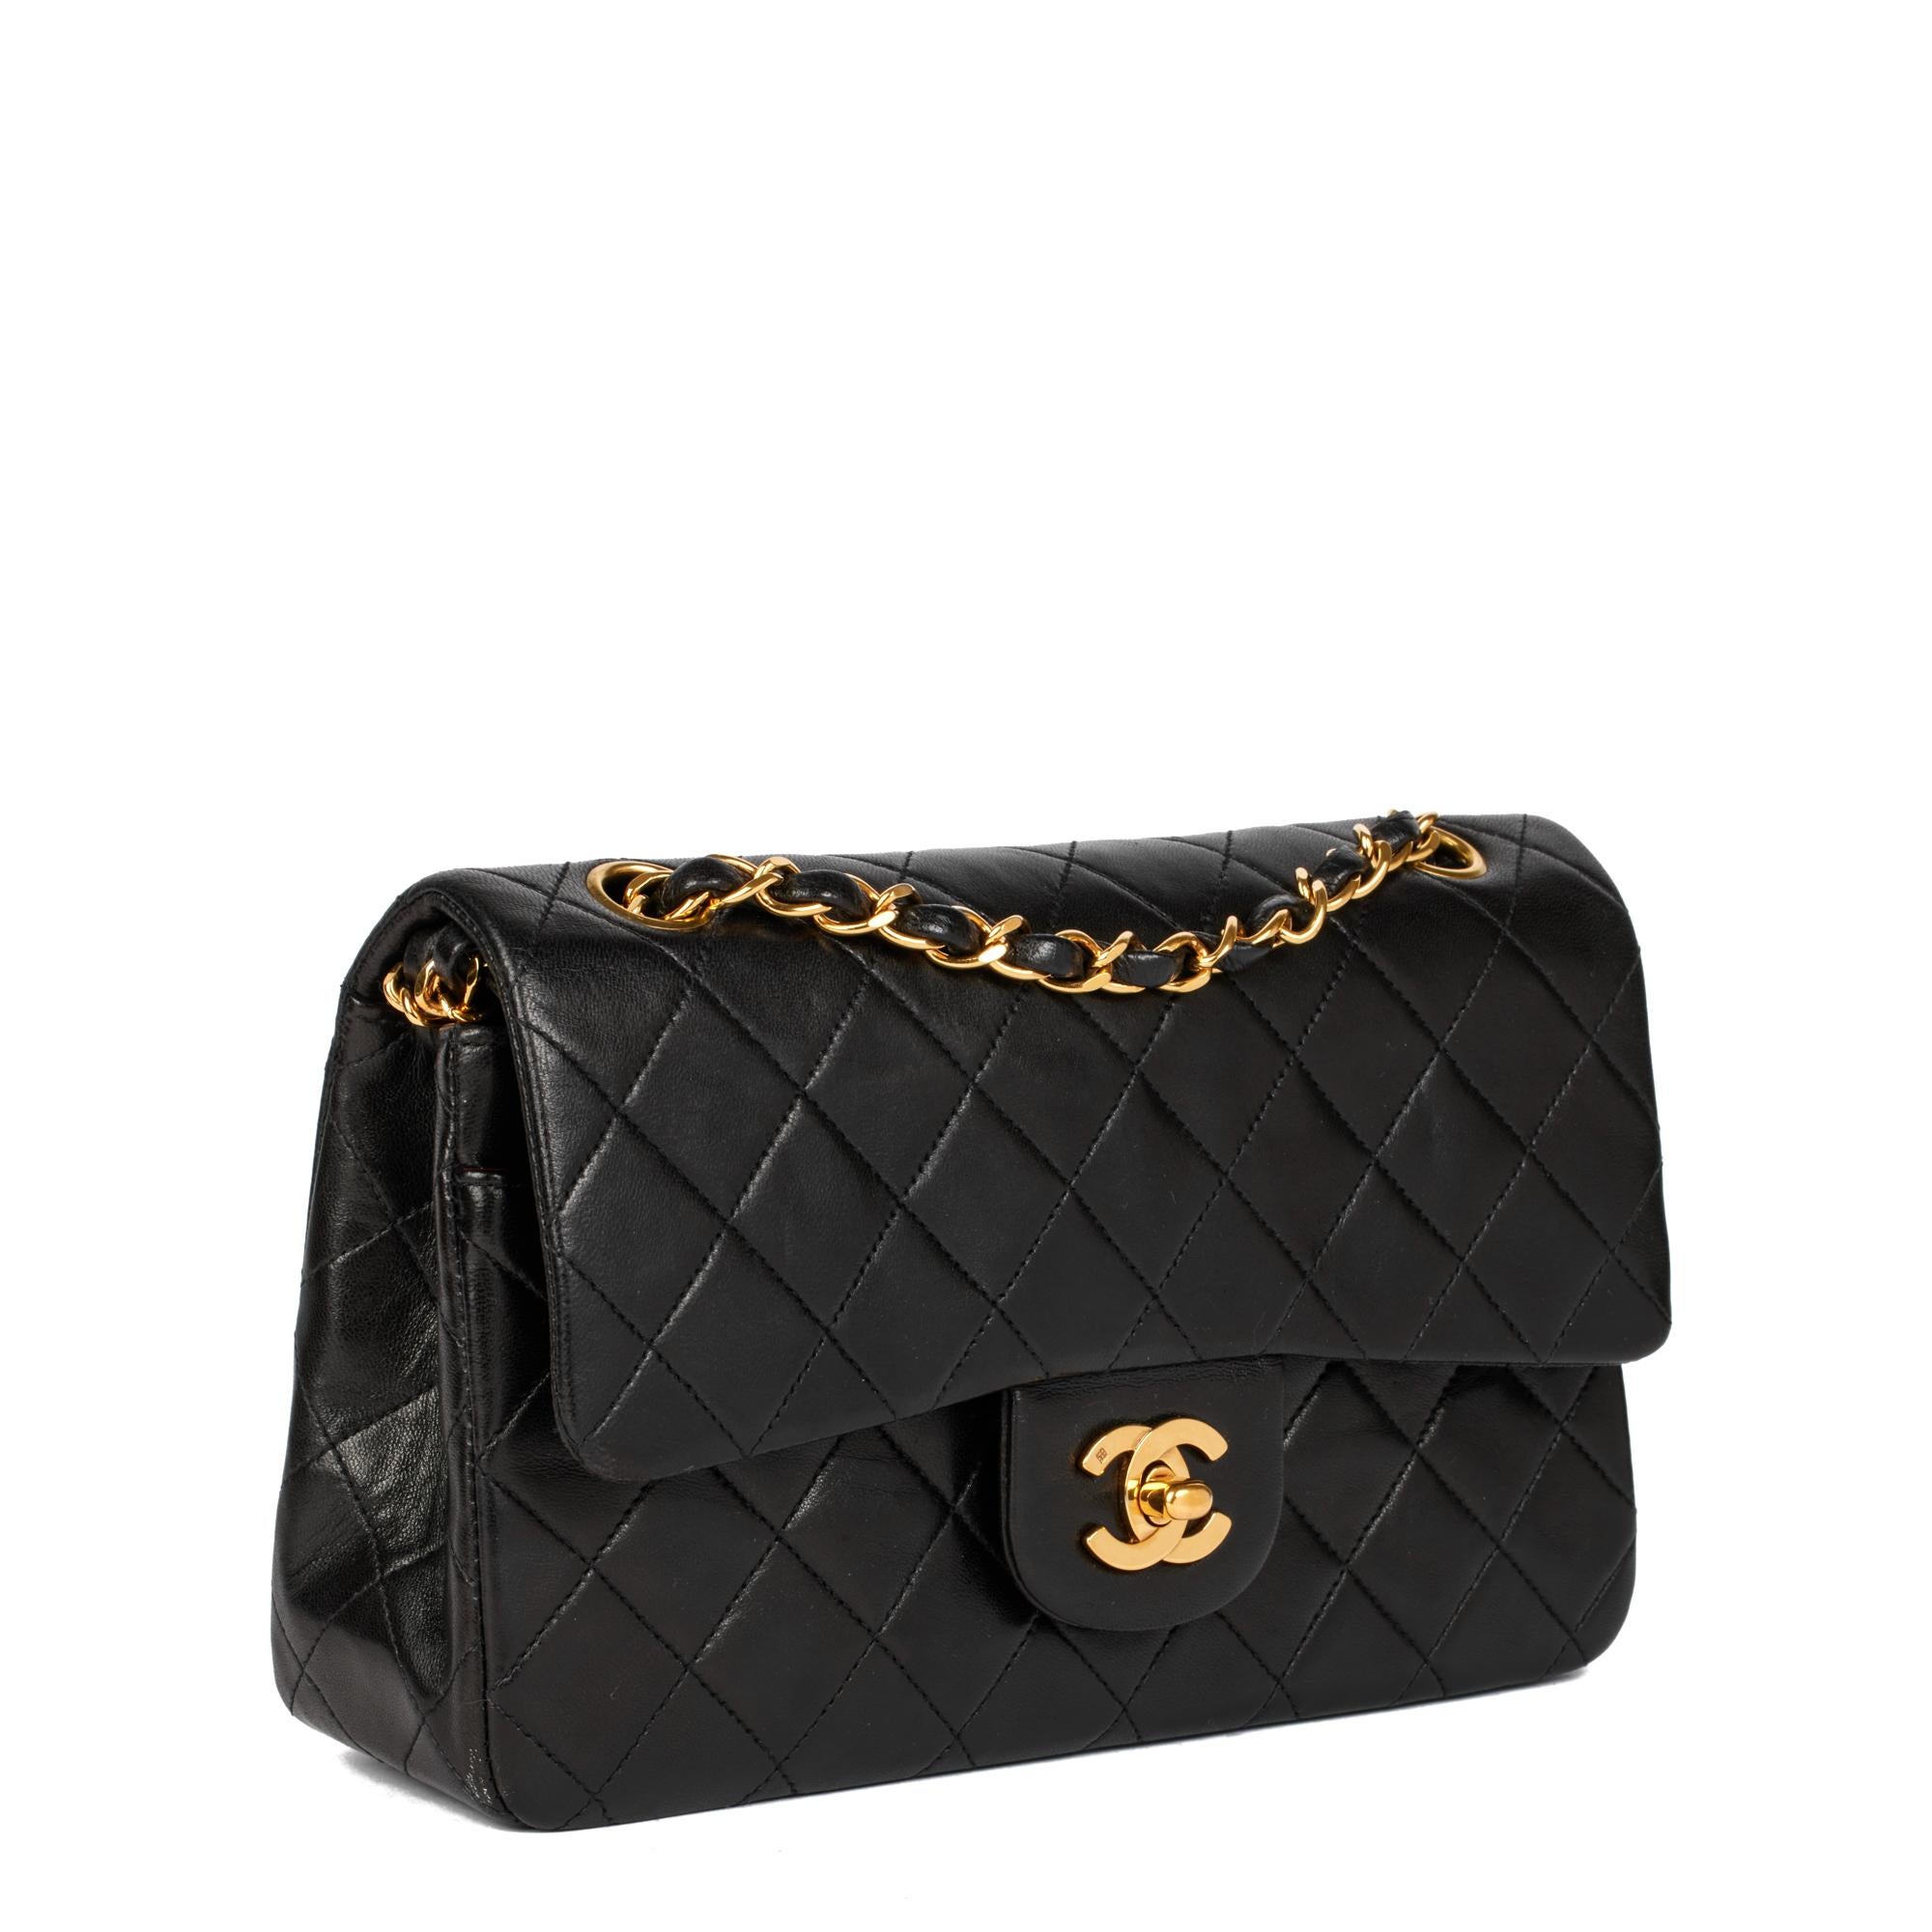 CHANEL
Black Quilted Lambskin Vintage Small Classic Double Flap Bag

Serial Number: 2710414
Age (Circa): 1993
Accompanied By: Chanel Dust Bag, Authenticity Card
Authenticity Details: Authenticity Card, Serial Sticker (Made in France)
Gender: